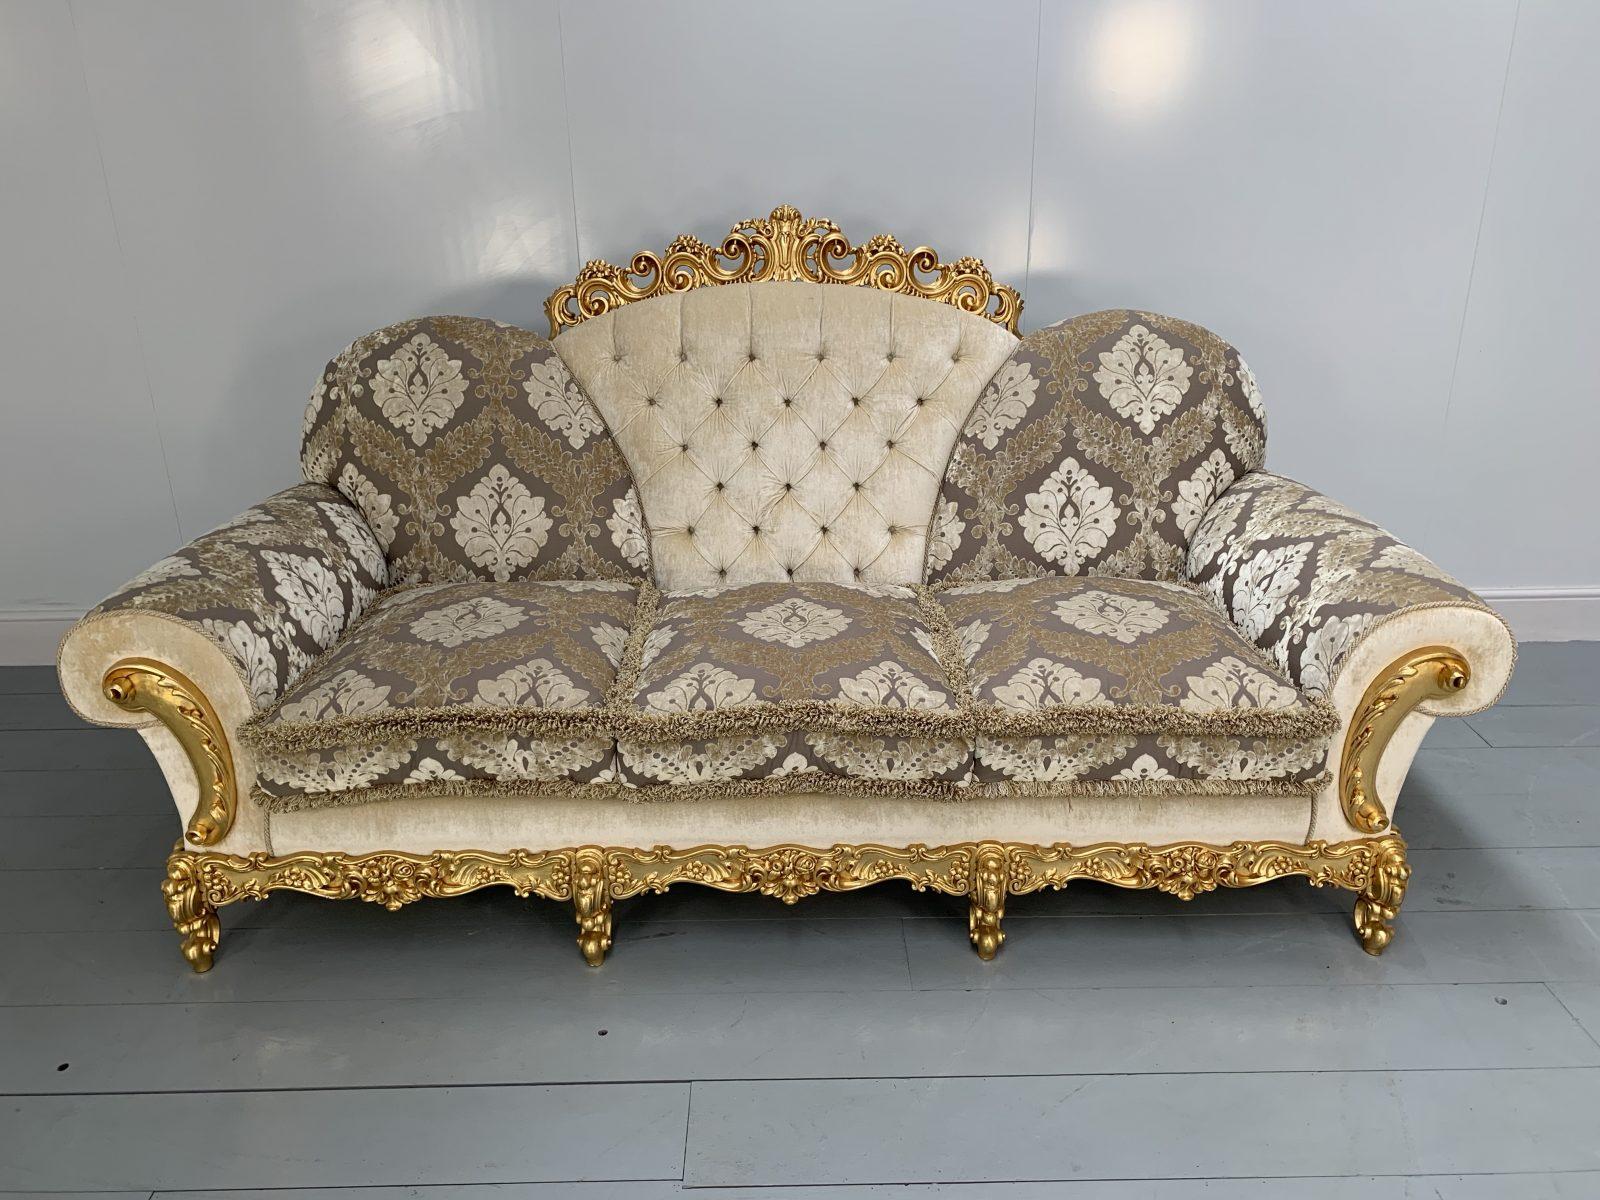 Contemporary Asnaghi Baroque Rococo Sofa & 2 Armchair Suite in Silk Damask and Gilt